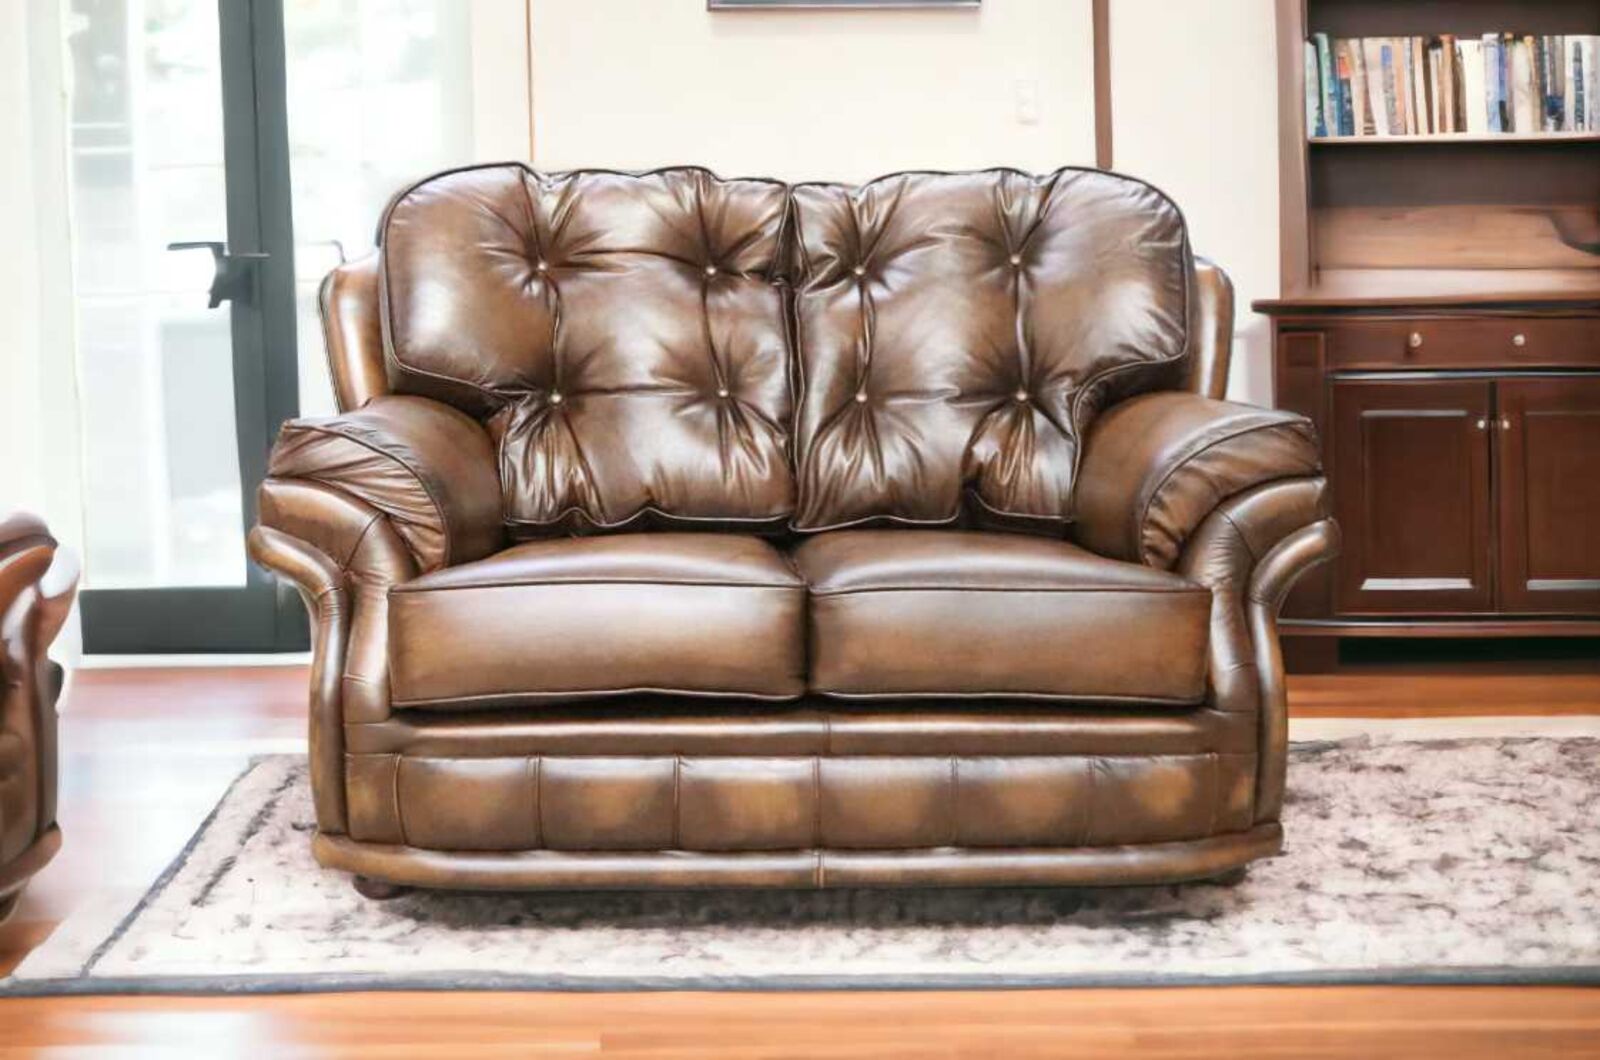 Product photograph of Antique Tan Leather Chesterfield Knightsbridge 2 Seater Settee Sofa Designersofas4u from Designer Sofas 4U